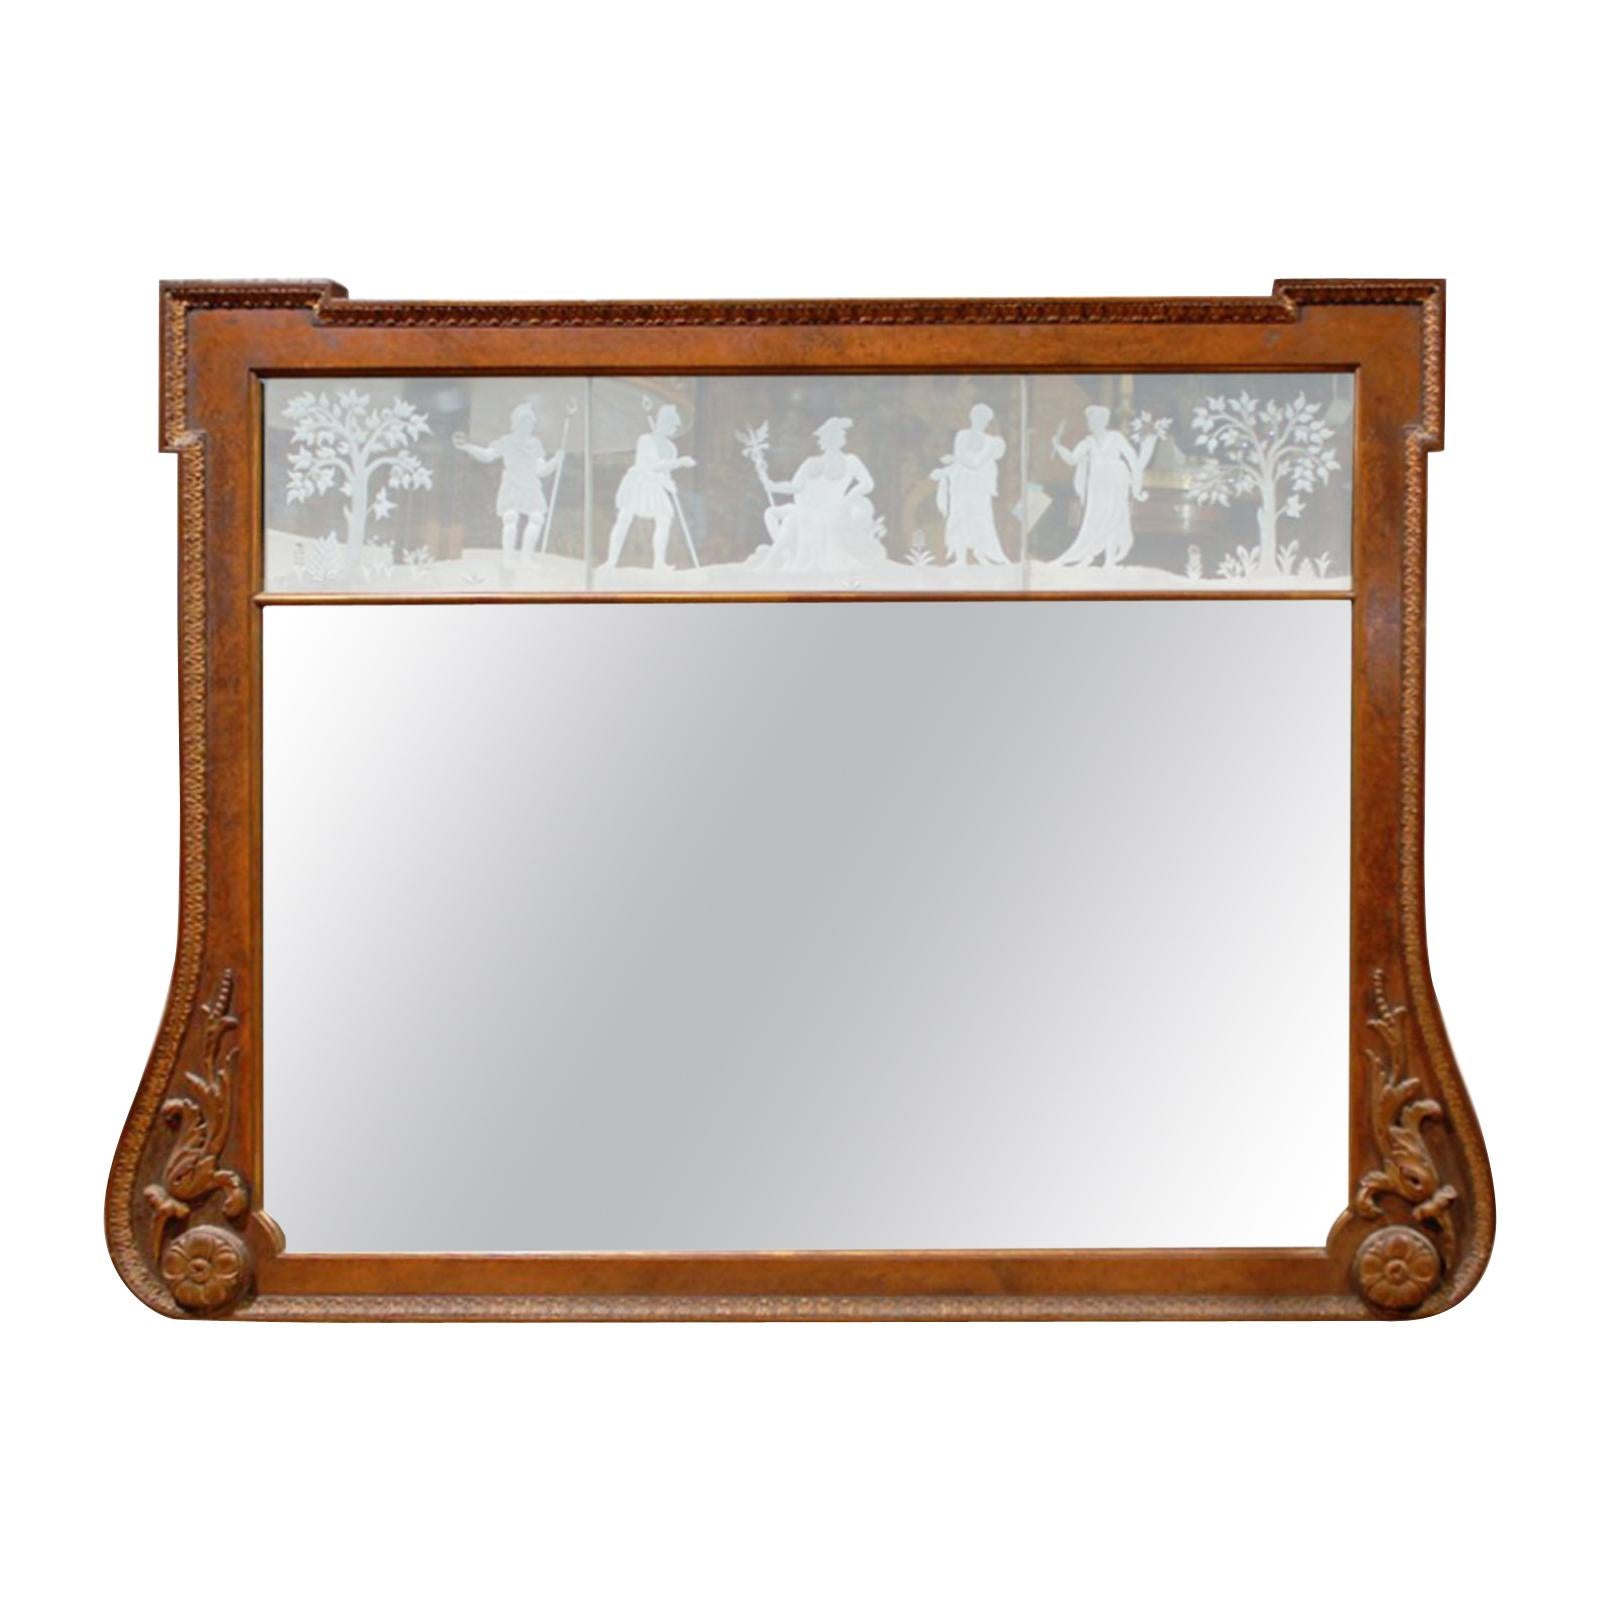 Early 20th Century Georgian Style Over Mantle Mirror with Etched Panels